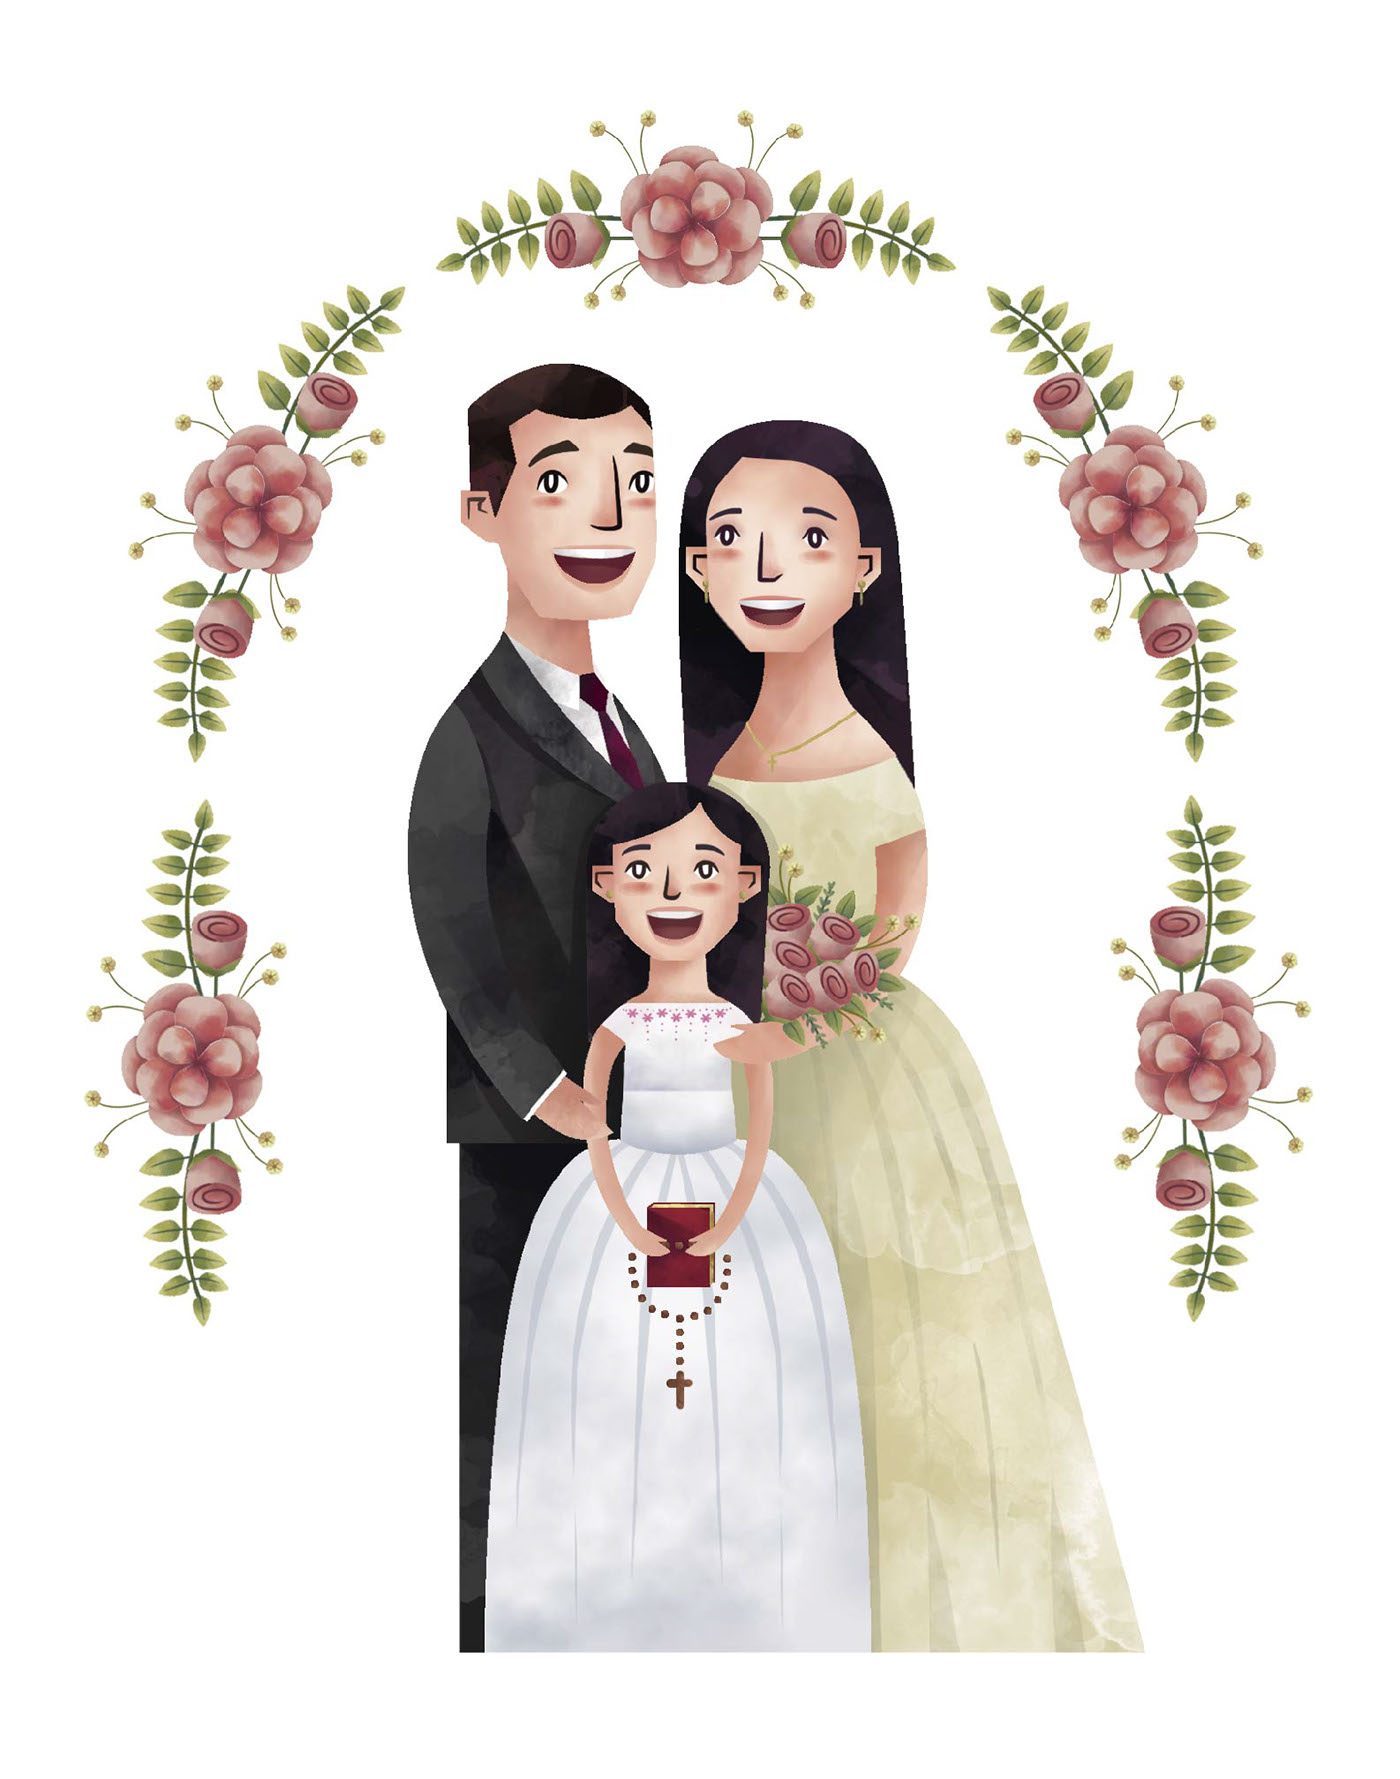 Wedding and First Communion Illustration on Behance